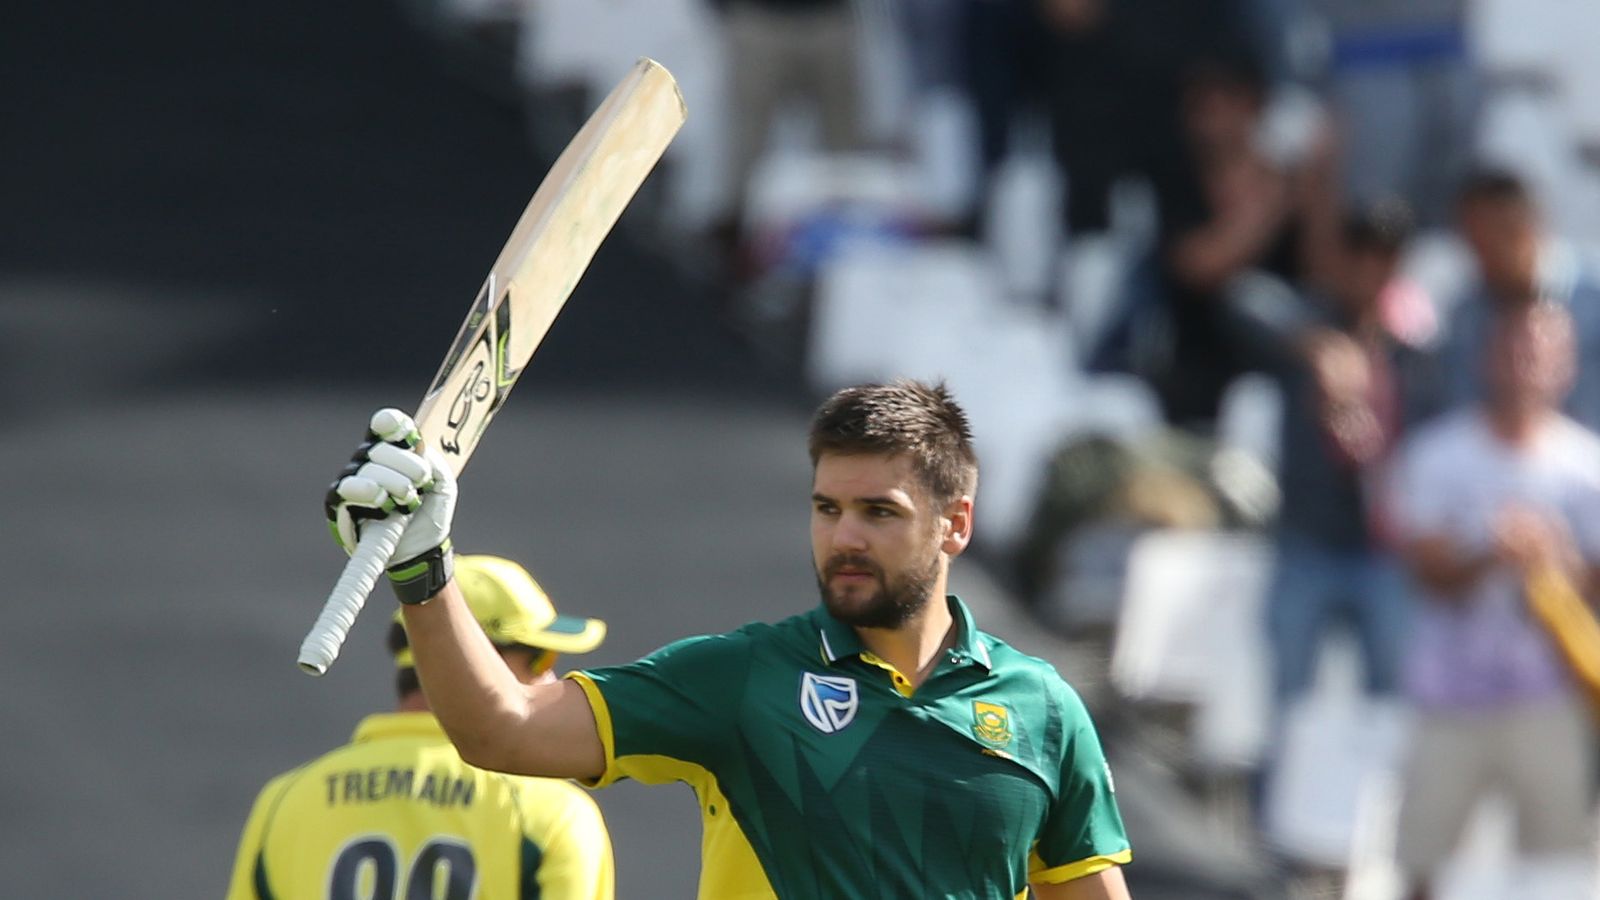 Rilee Rossouw Criticised For Quitting South Africa For Hampshire